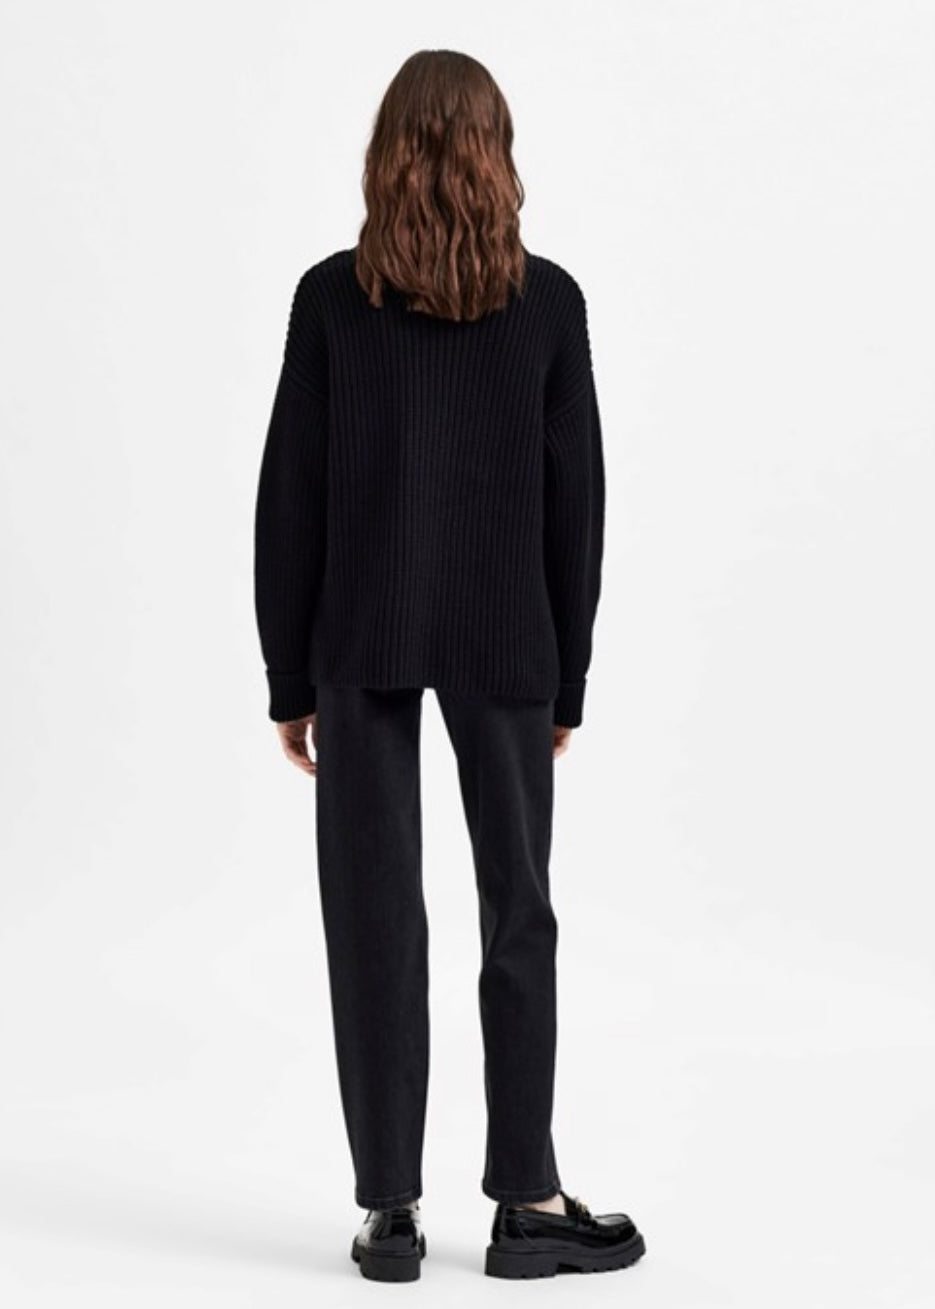 SELECTED FEMME - SELMA LS KNIT PULLOVER - BLACK